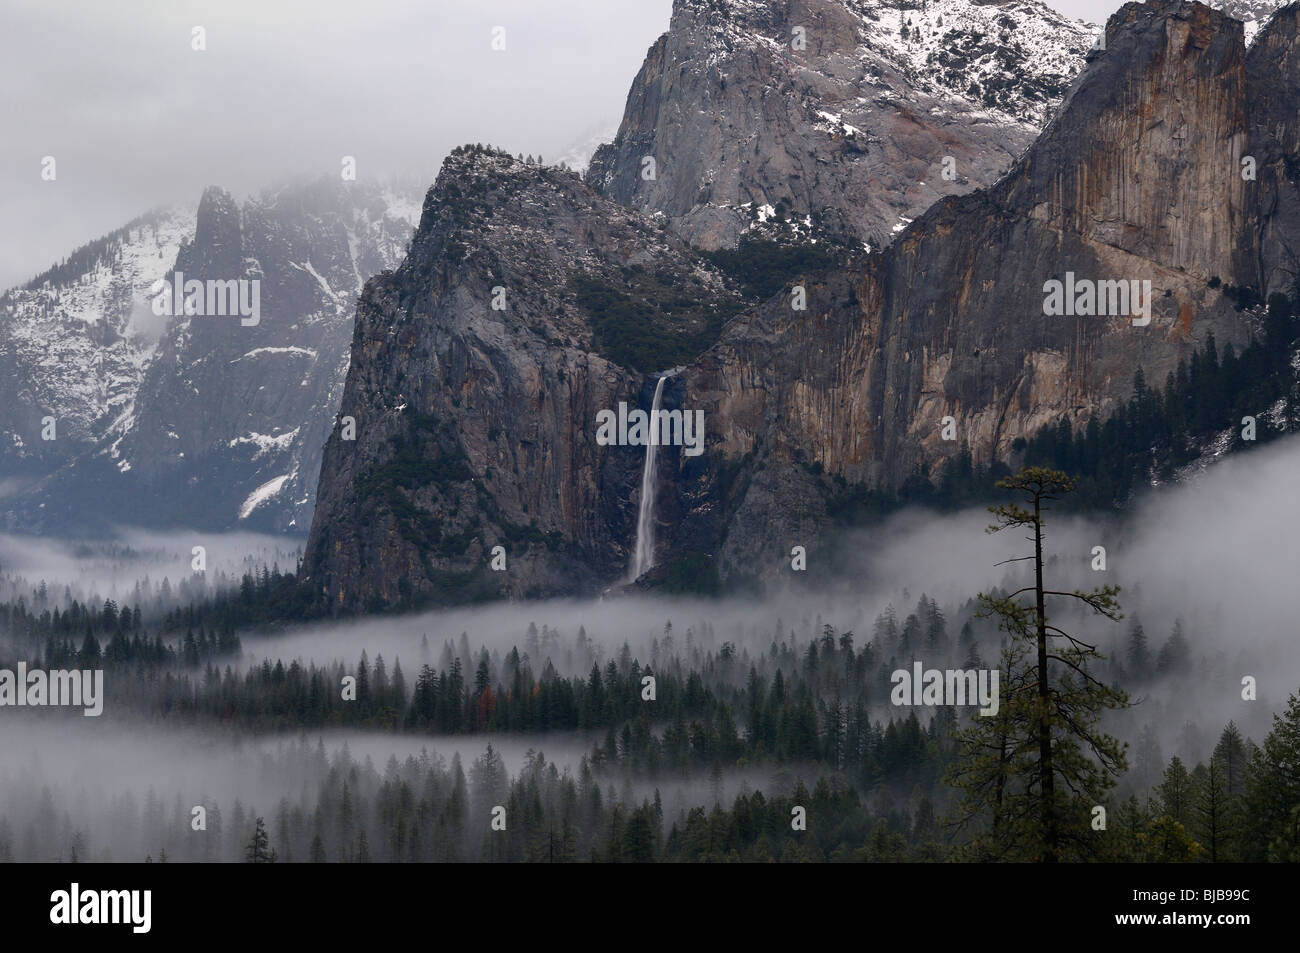 Bridalveil Fall waterfall emptying into clouds and fog in Yosemite Valley after a winter storm seen from Tunnel View Yosemite National Park California Stock Photo